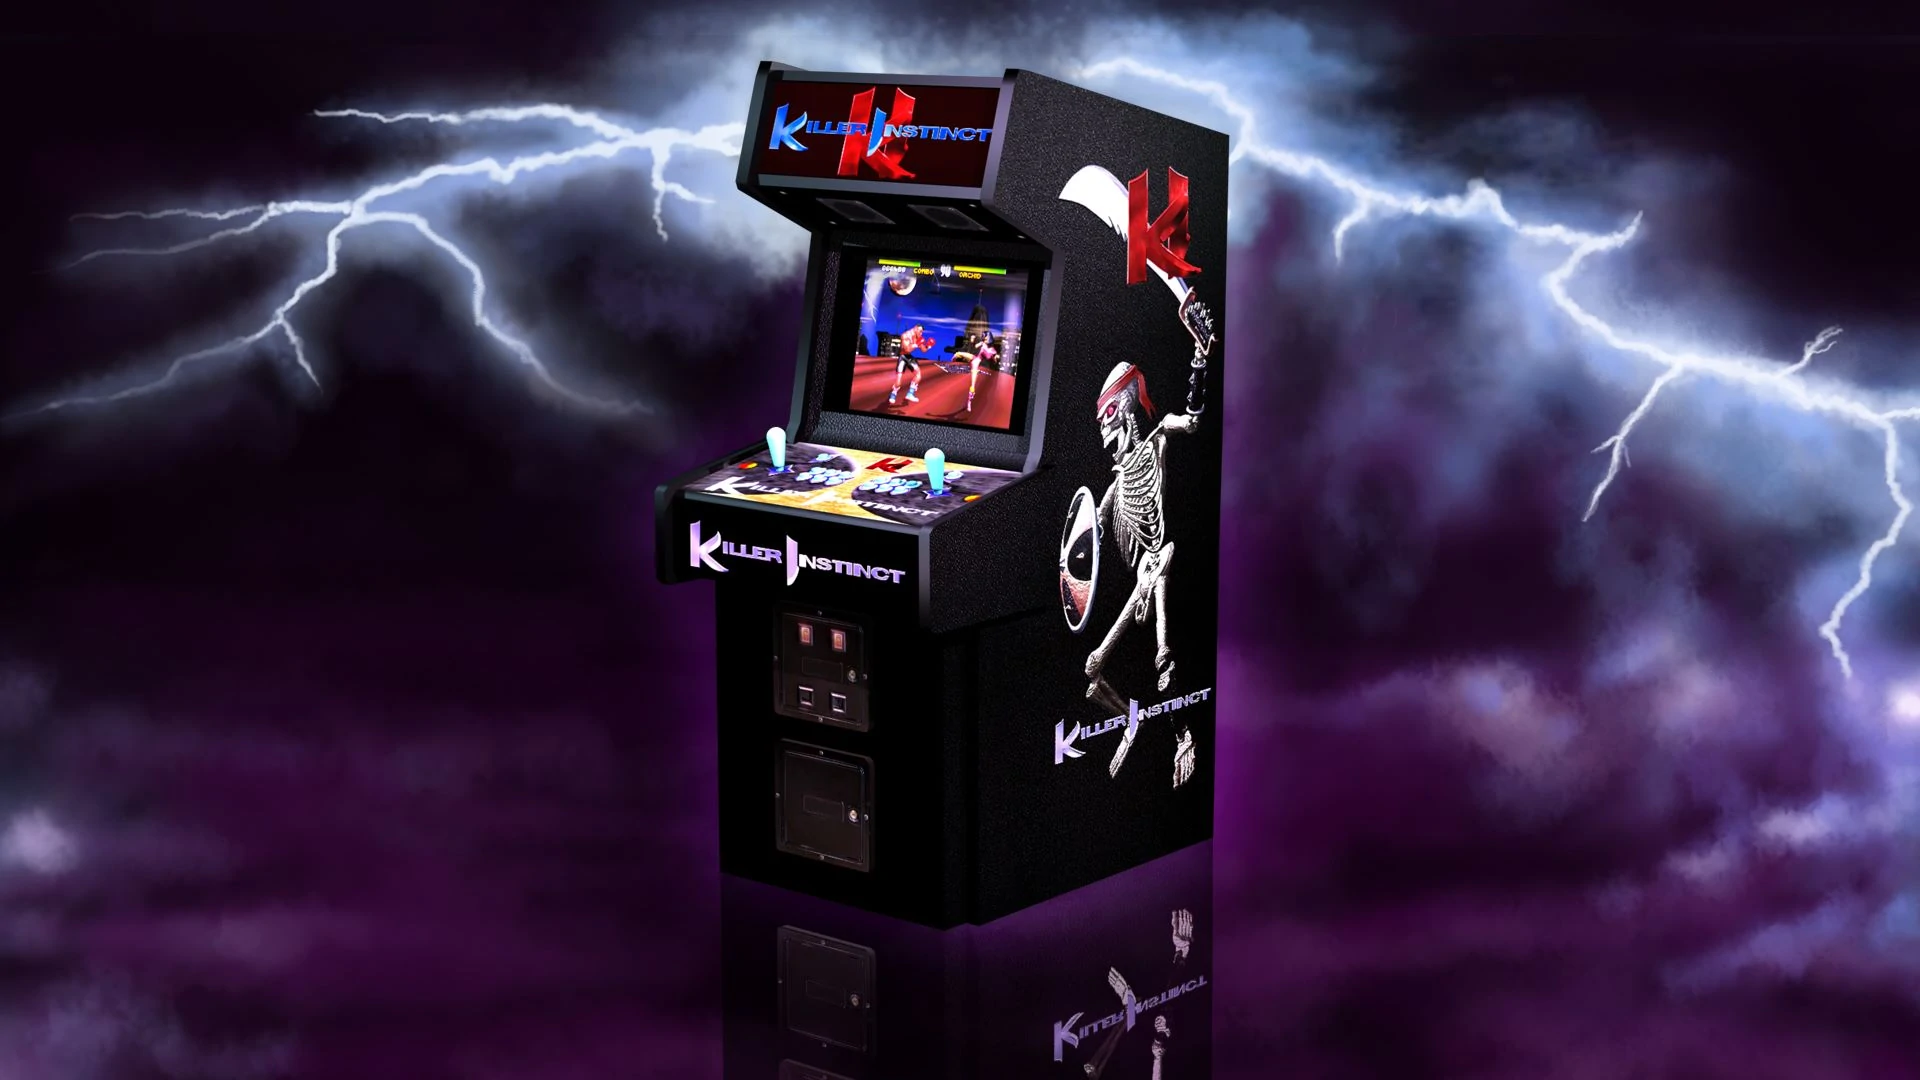 Arcade1Up Opens Pre-orders for Killer Instinct PRO Arcade Cabinets